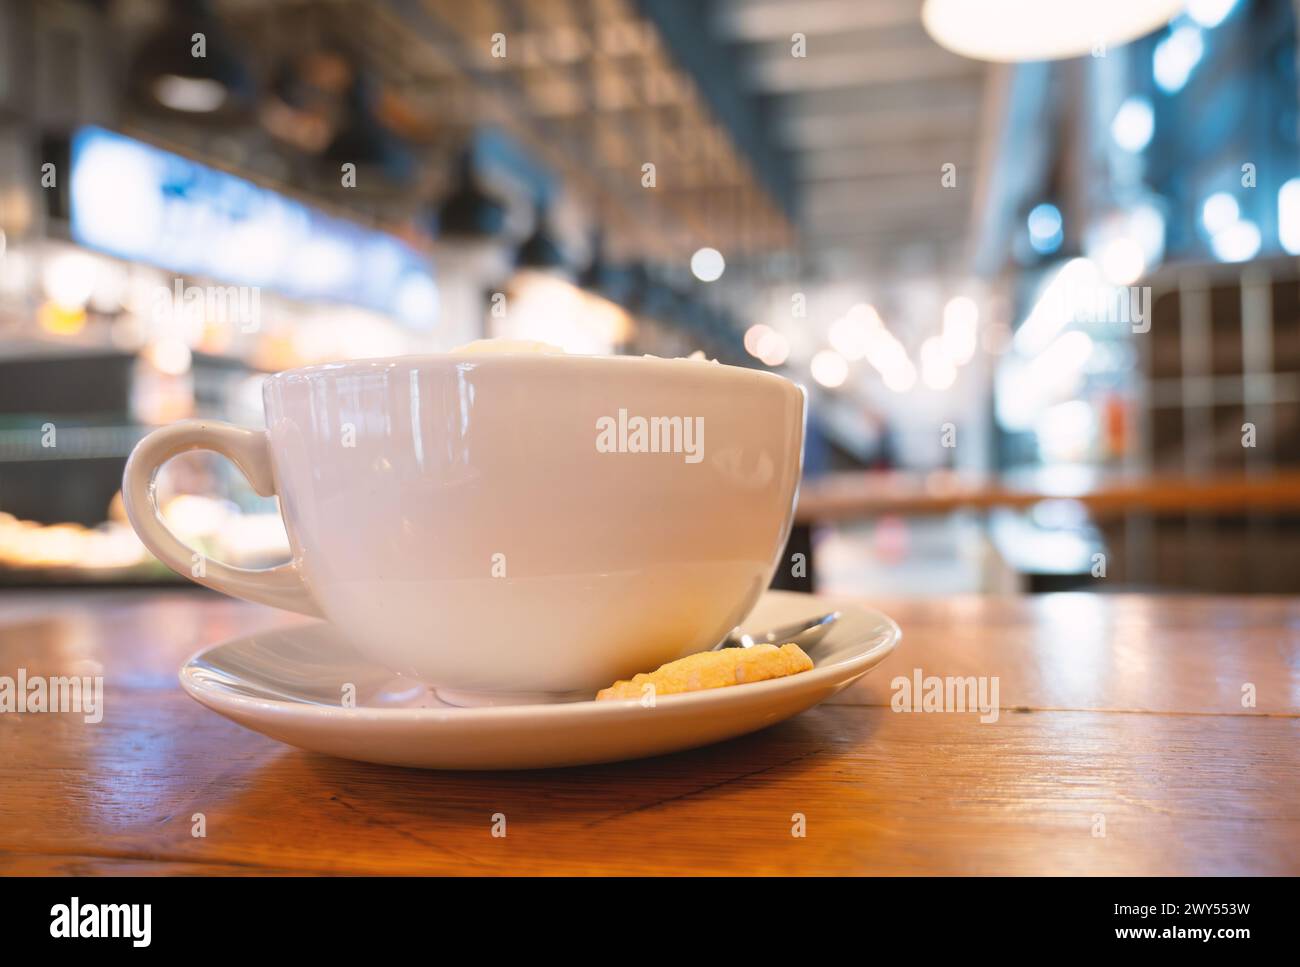 Cup of coffee in a cafe, hot drink with caffeine, breakfast in a restaurant, taking a break Stock Photo